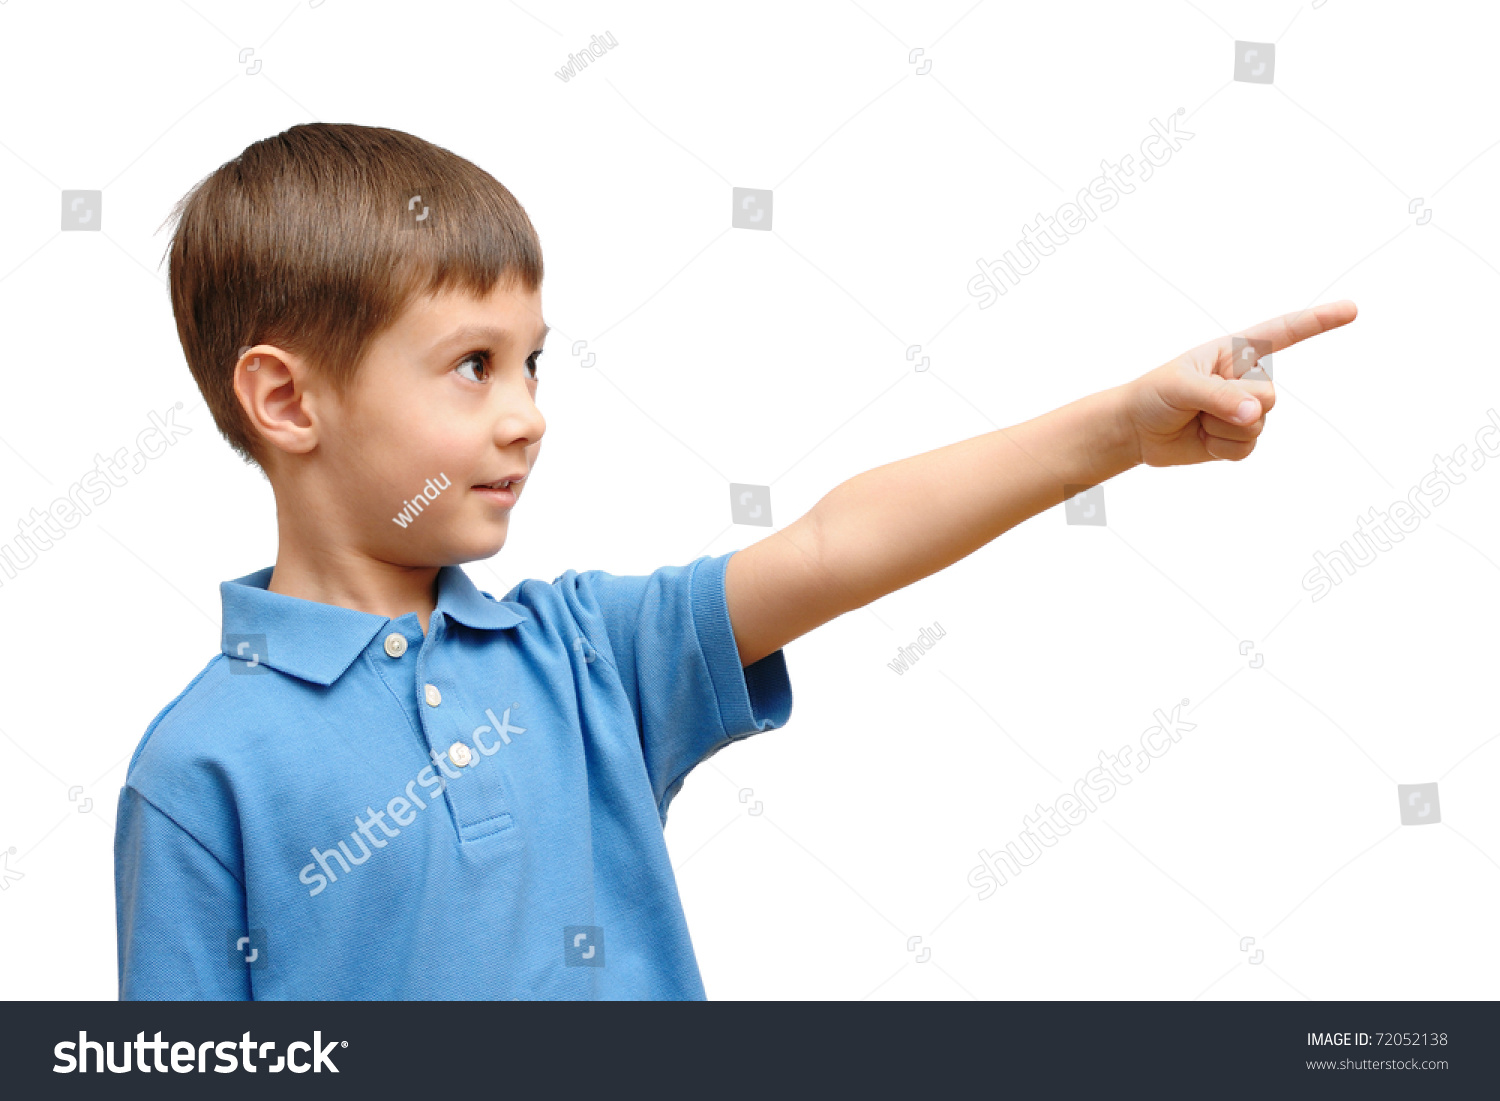 stock-photo-child-pointing-his-finger-is